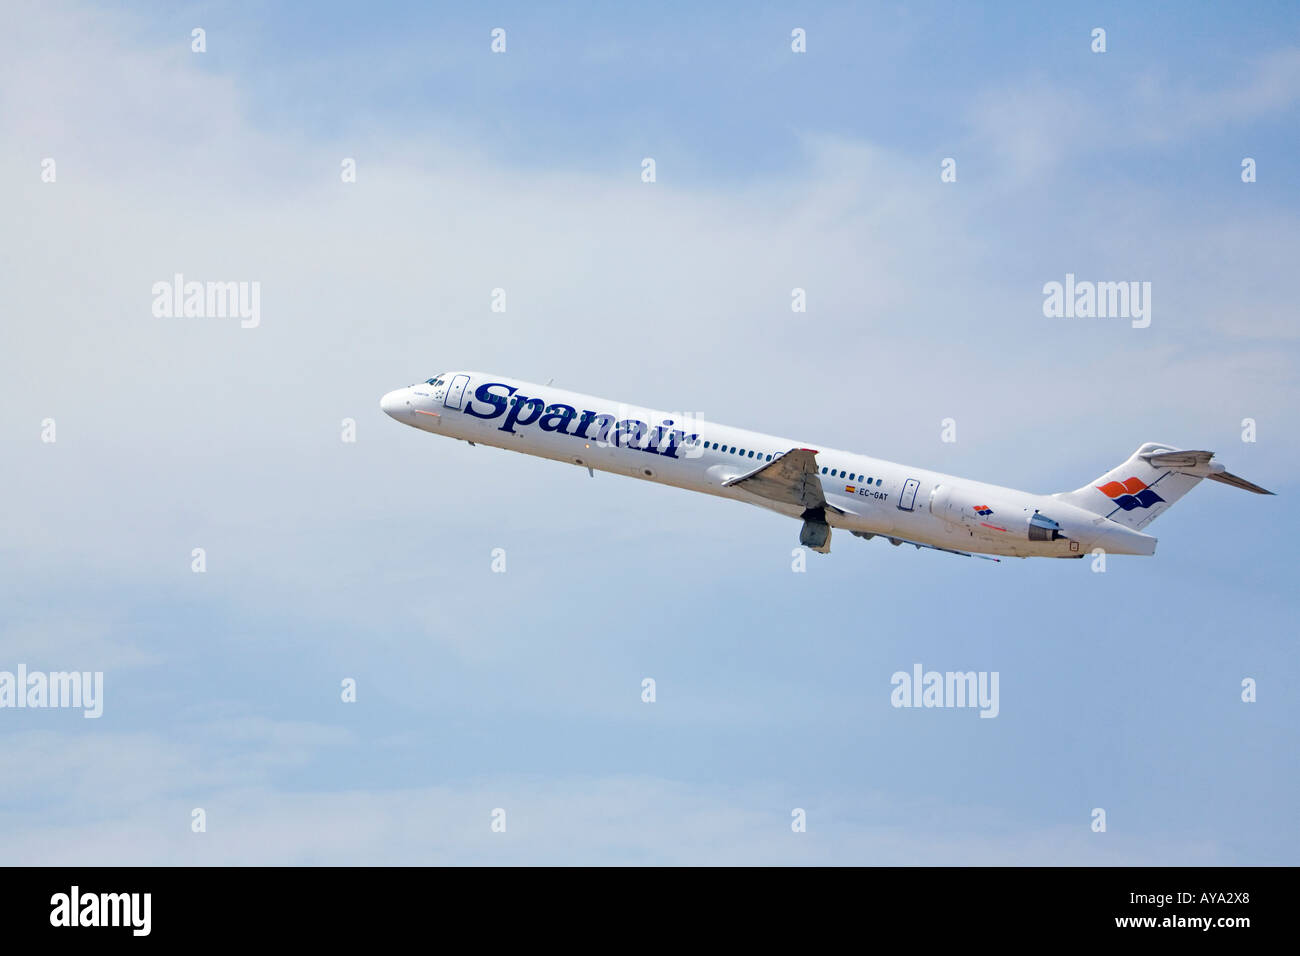 Aircraft of the Spanish airline Spanair taking off Stock Photo